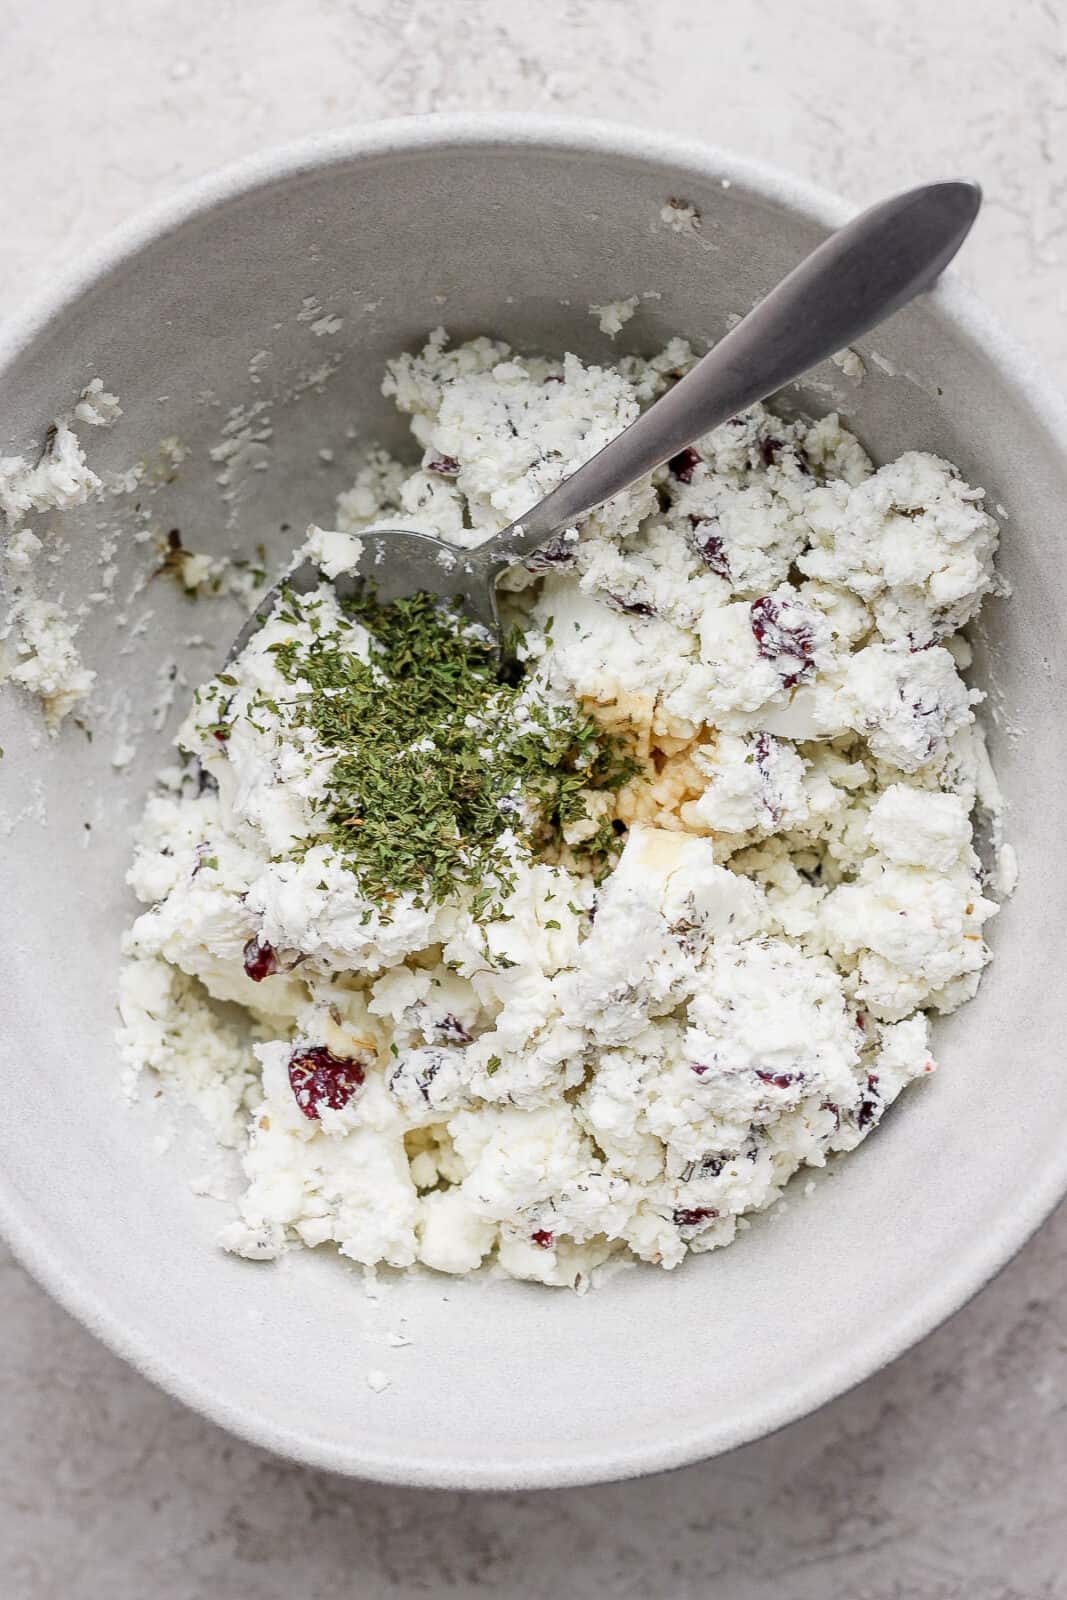 A fork mixing the goat cheese ball ingredients in a bowl.